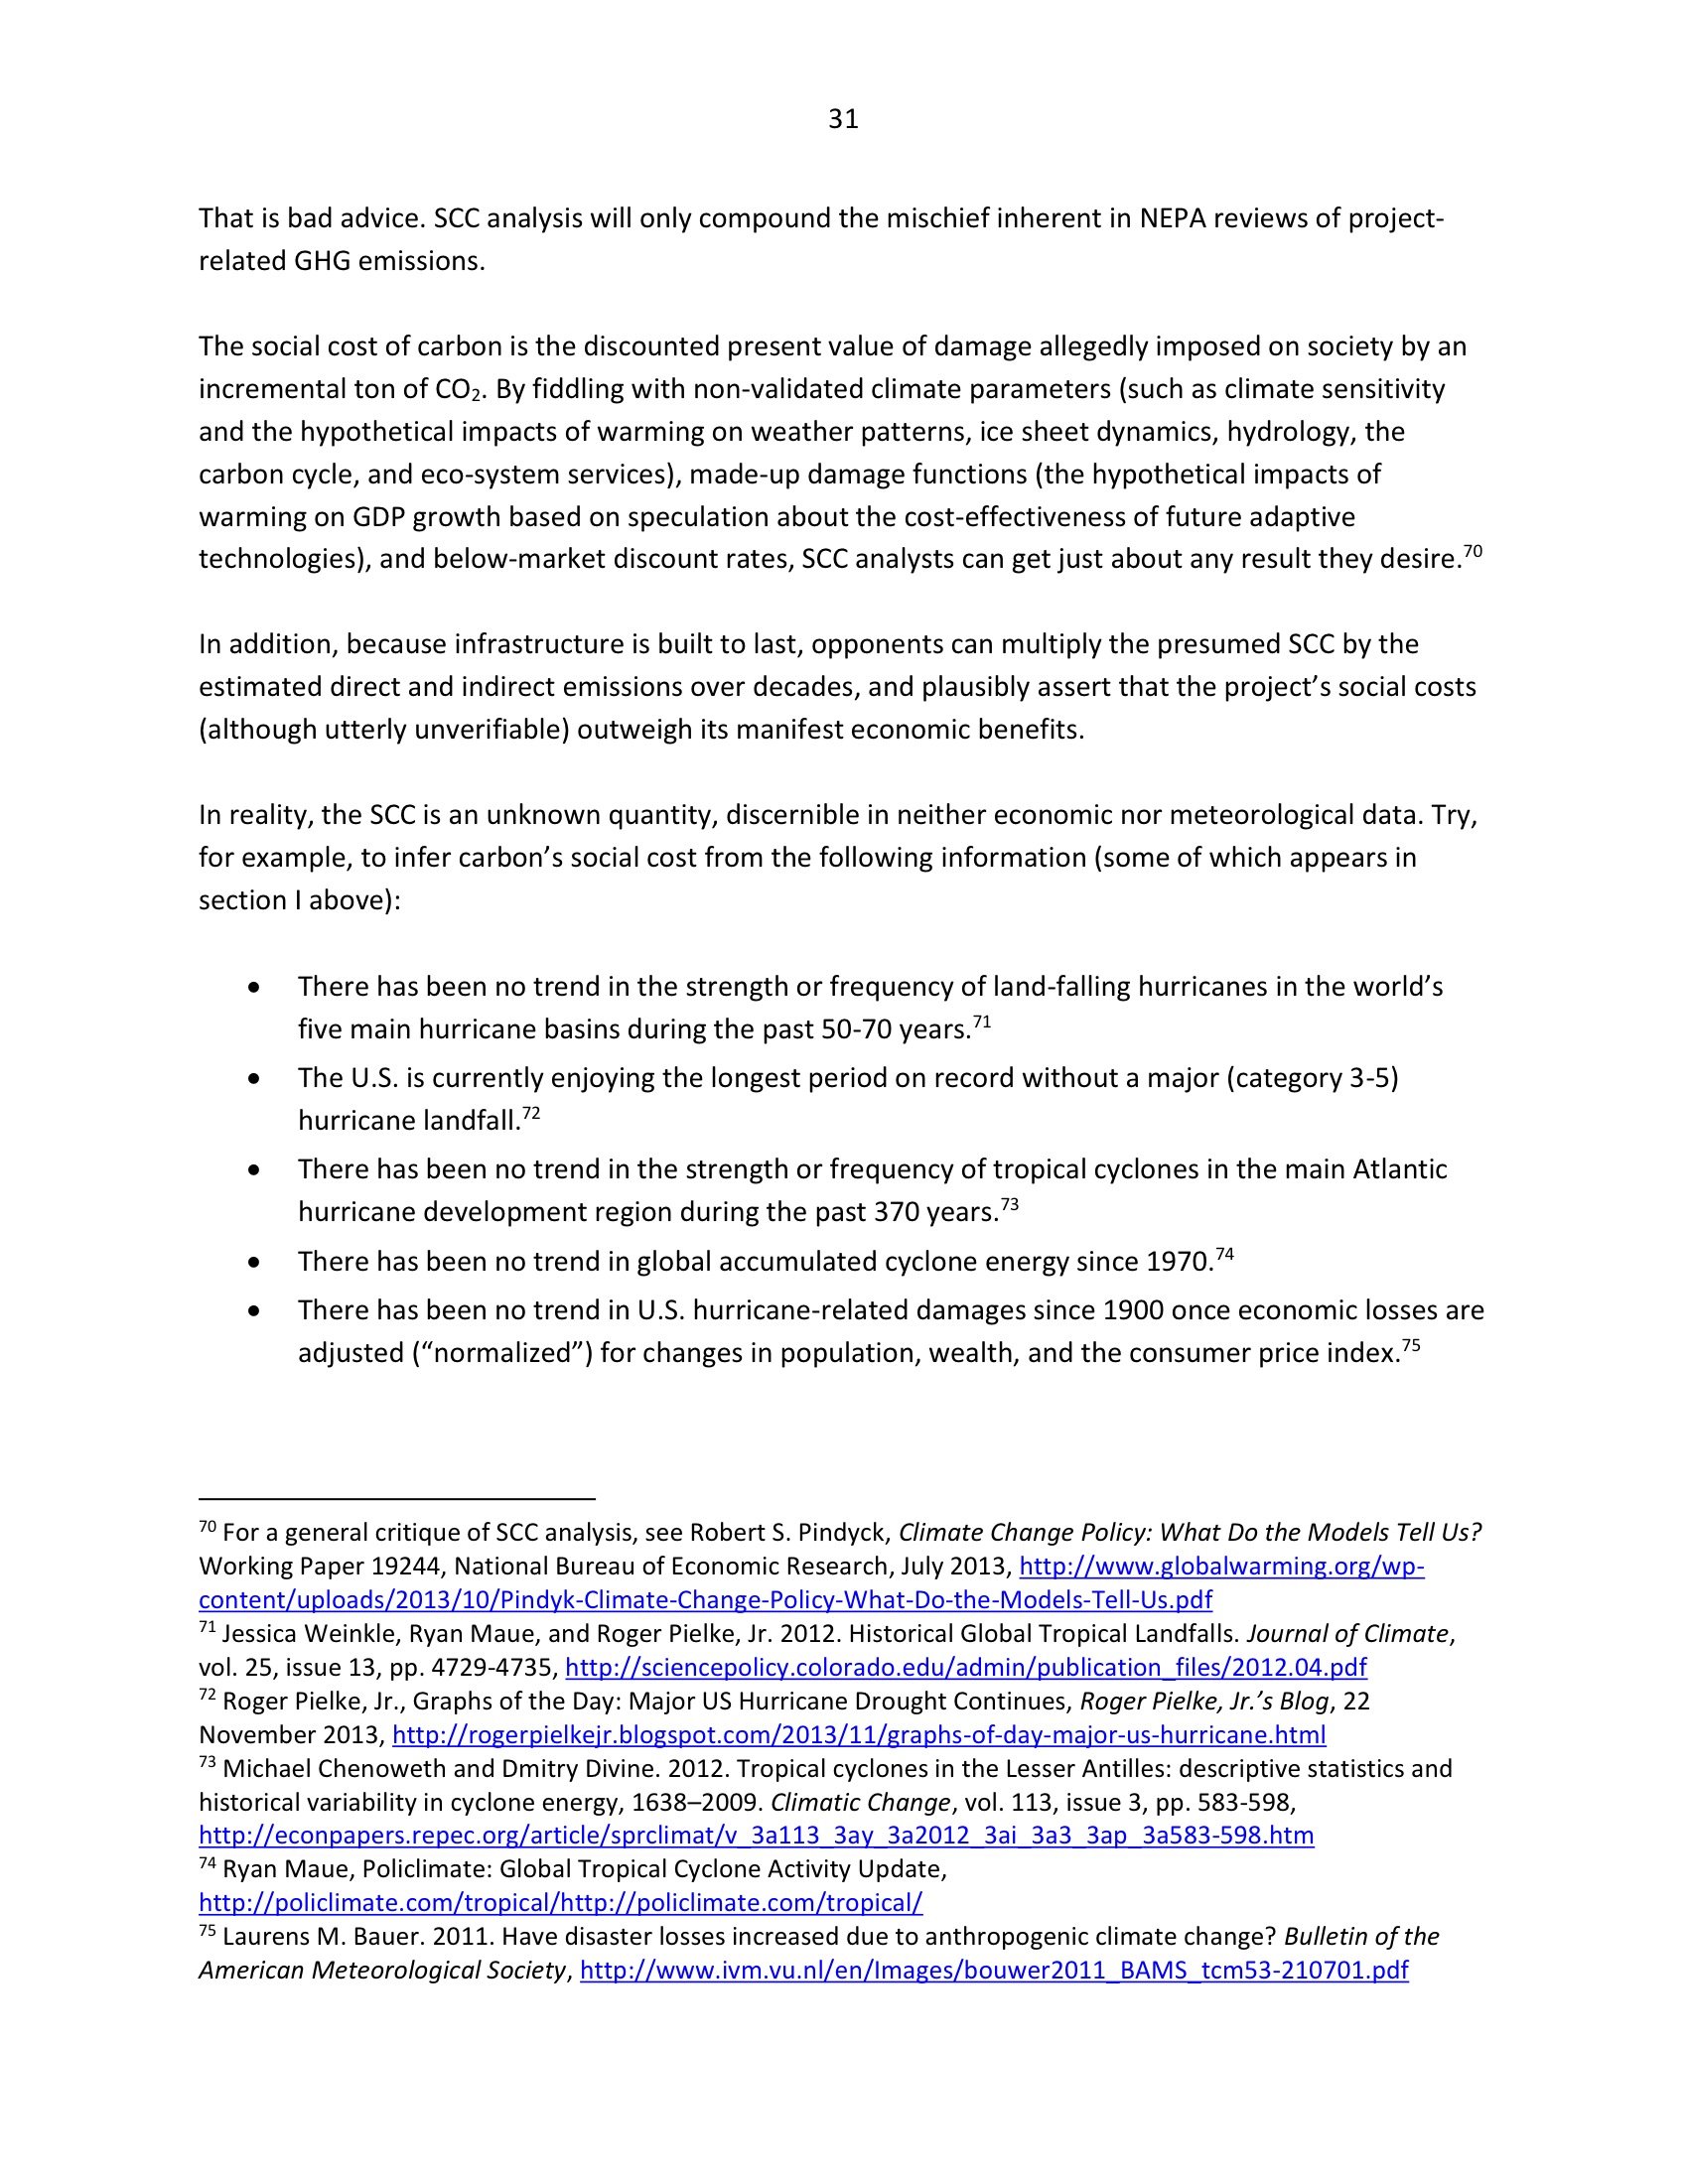 Marlo Lewis Competitive Enterprise Institute and Free Market Allies Comment Letter on NEPA GHG Guidance Document 103-31